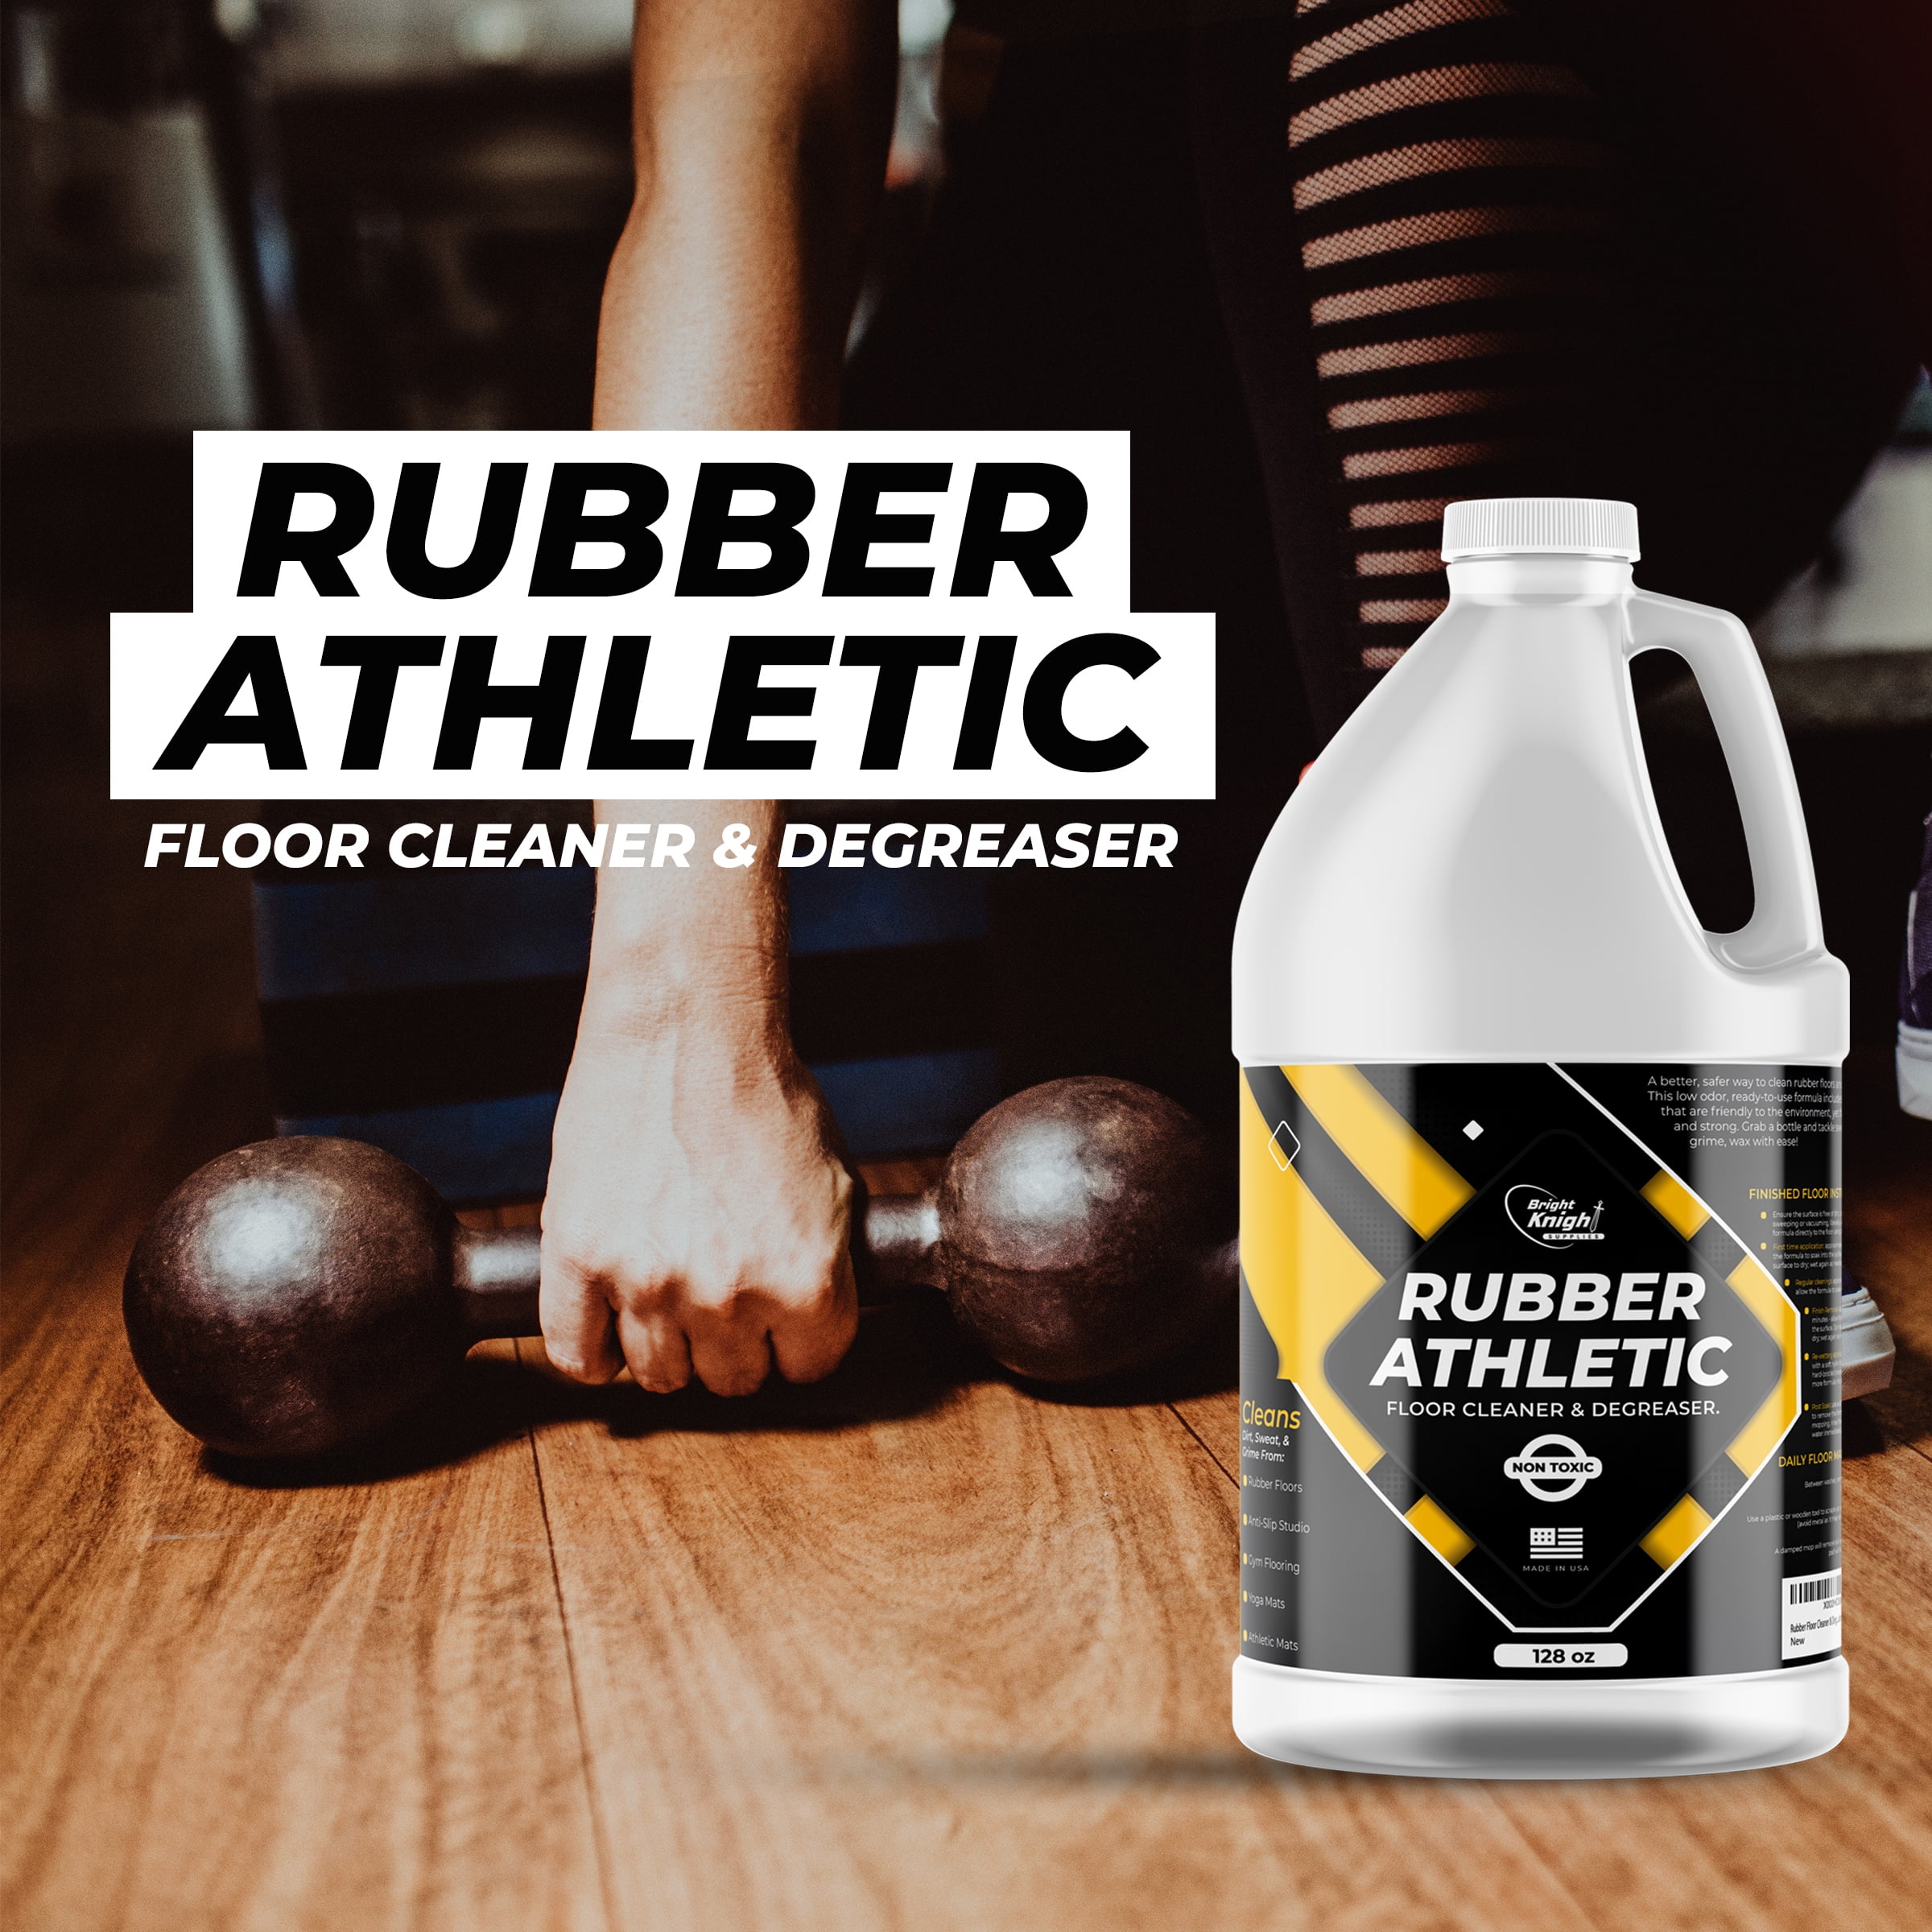 Bright Knight Supplies LLC Rubber Floor Cleaner & Degreaser - Cleaning  Solution for Anti-Slip Studio and Gym Flooring, Yoga, Wrestling,  Gymnastics, and Athletic Mats - Clean Off Dirt, Sweat, Stains 